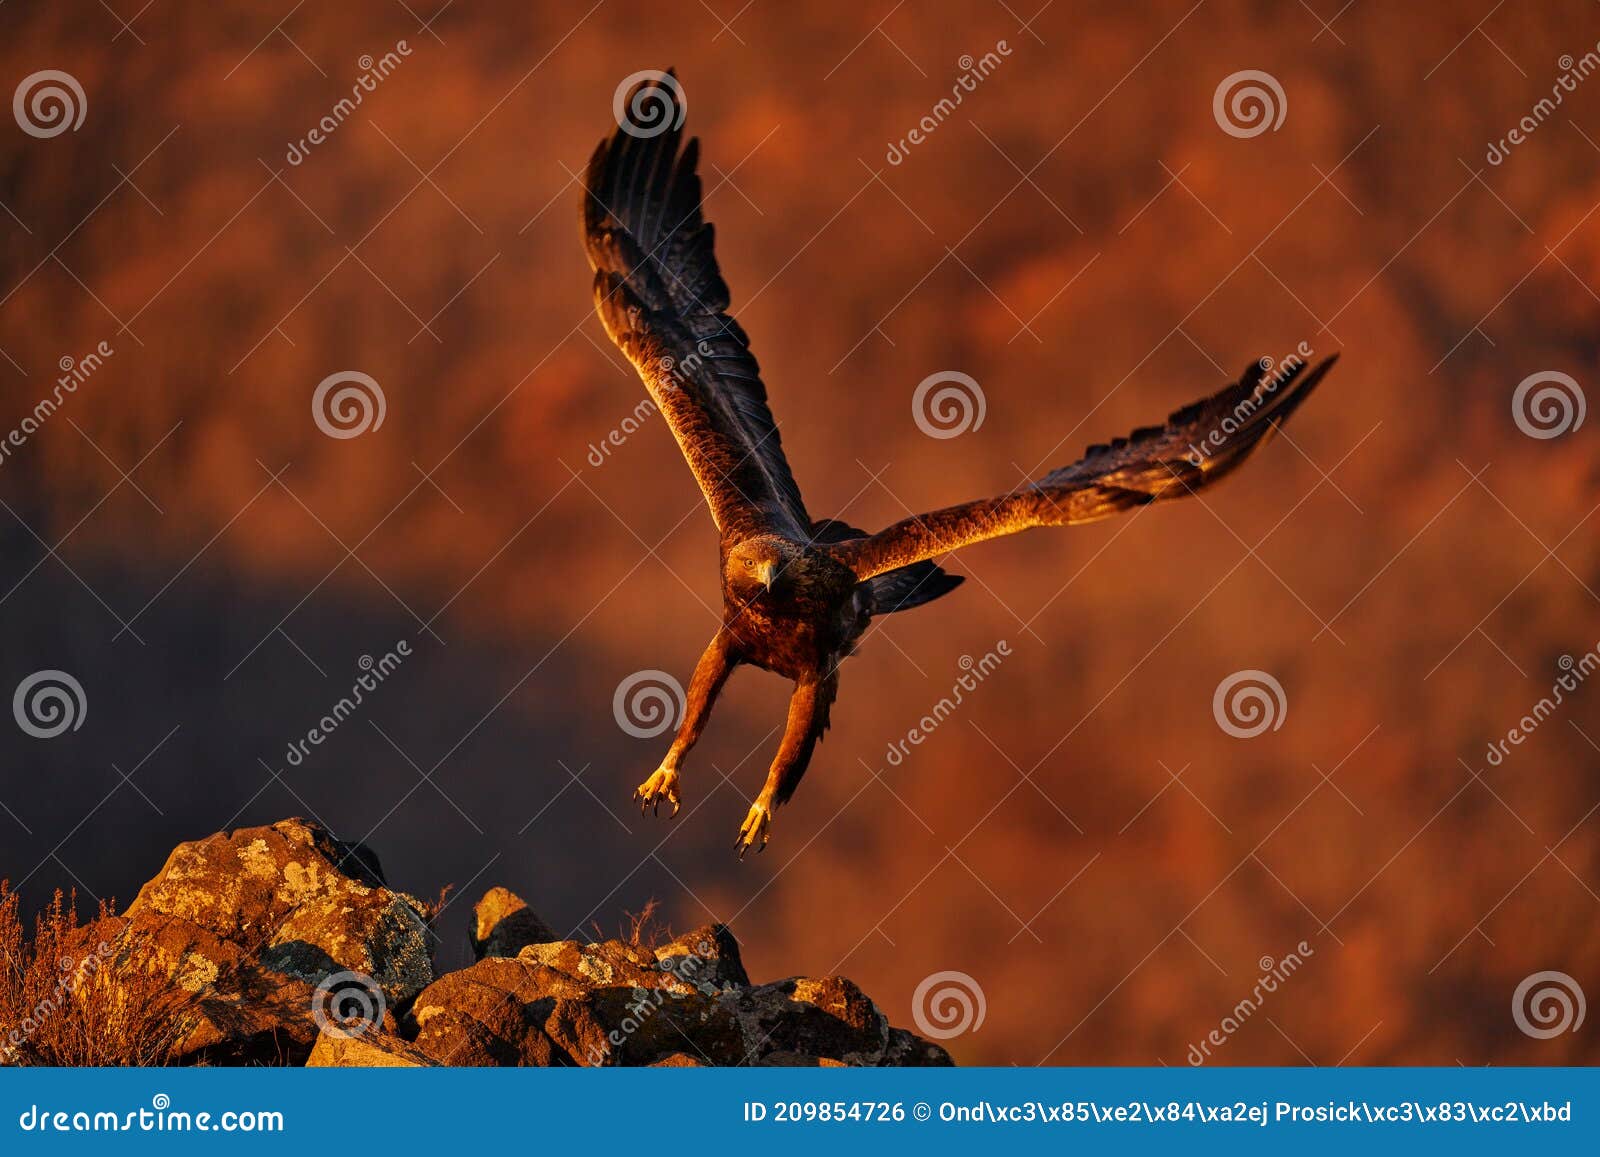 eastern rhodopes rock with eagle.       flying bird of prey golden eagle with large wingspan, photo with snowflakes during winter